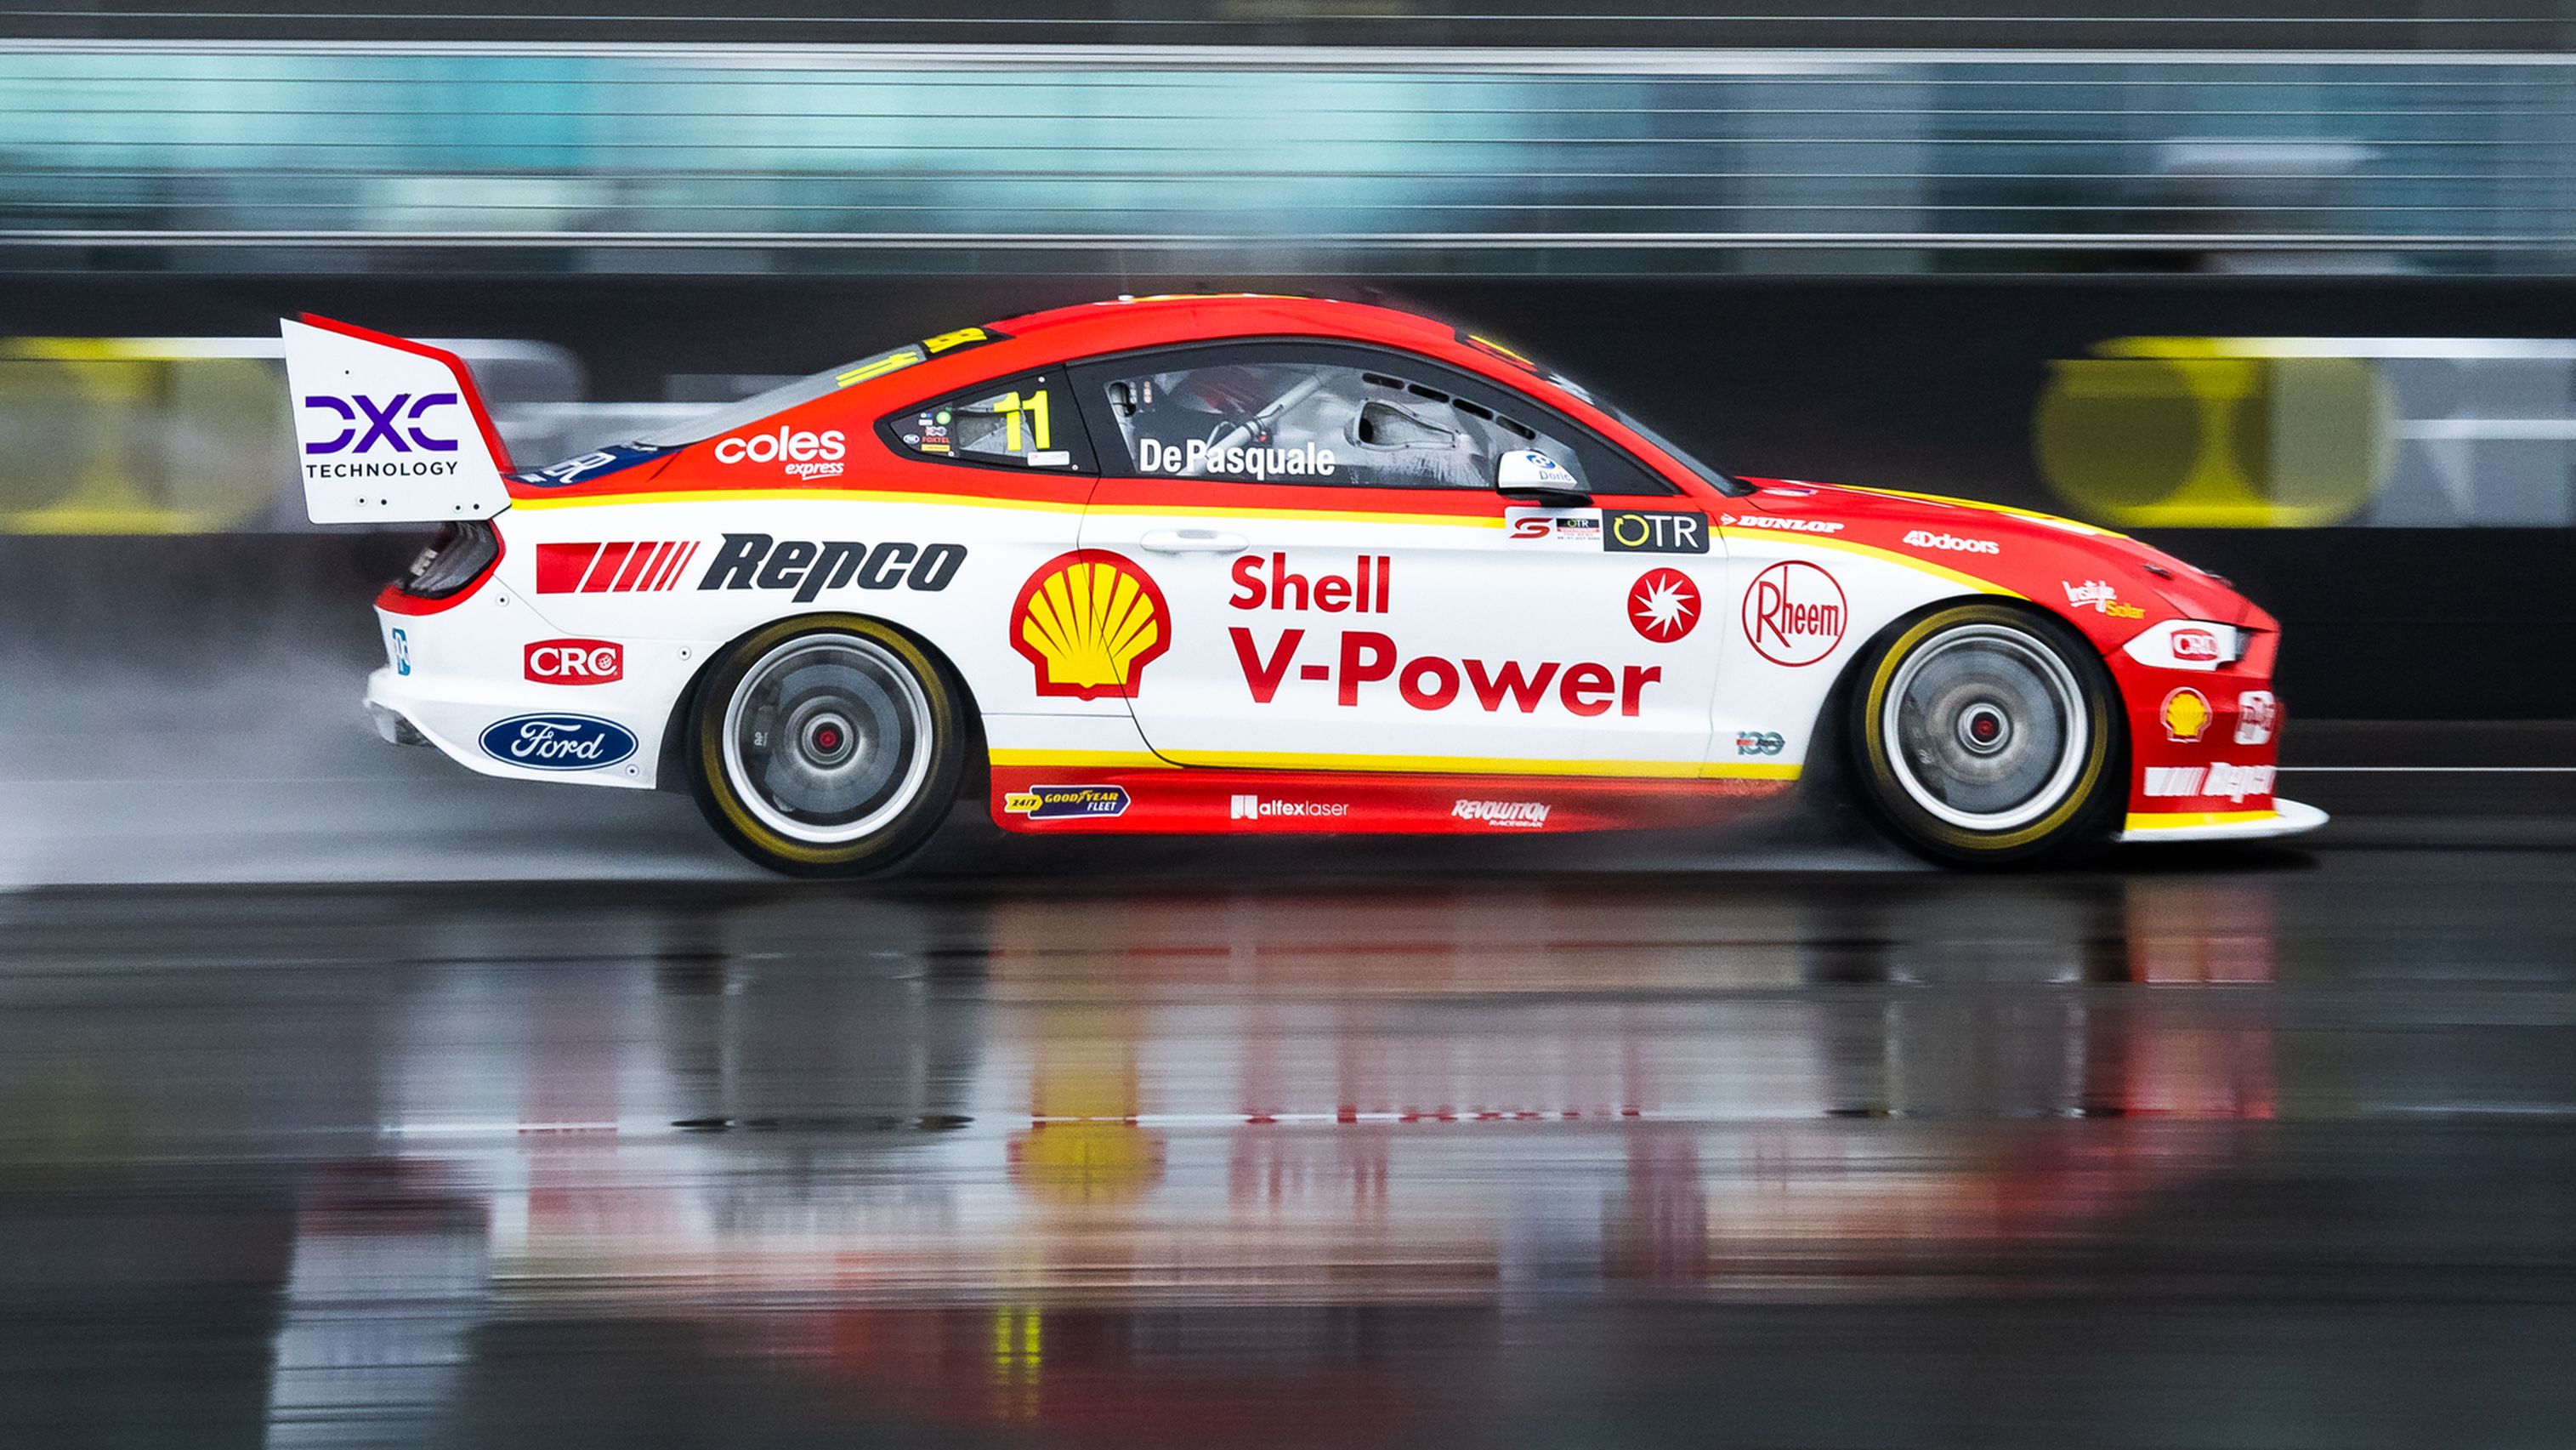 EXCLUSIVE: Supercars drivers brace for horrendous conditions during Sunday's Bathurst 1000